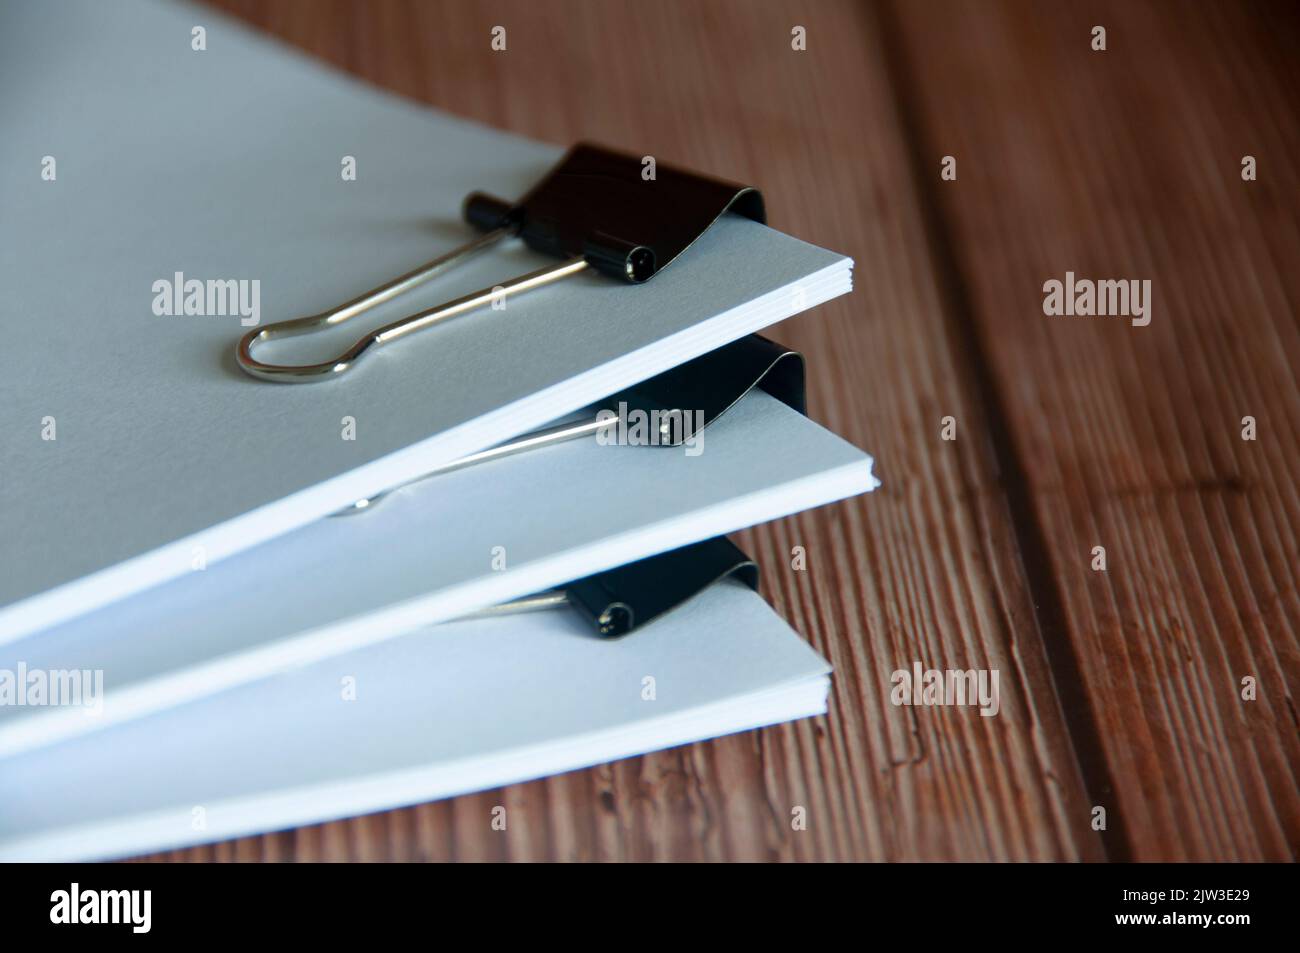 Paper stack of pile of documents on wooden desk. Copy space and business offices concept. Stock Photo